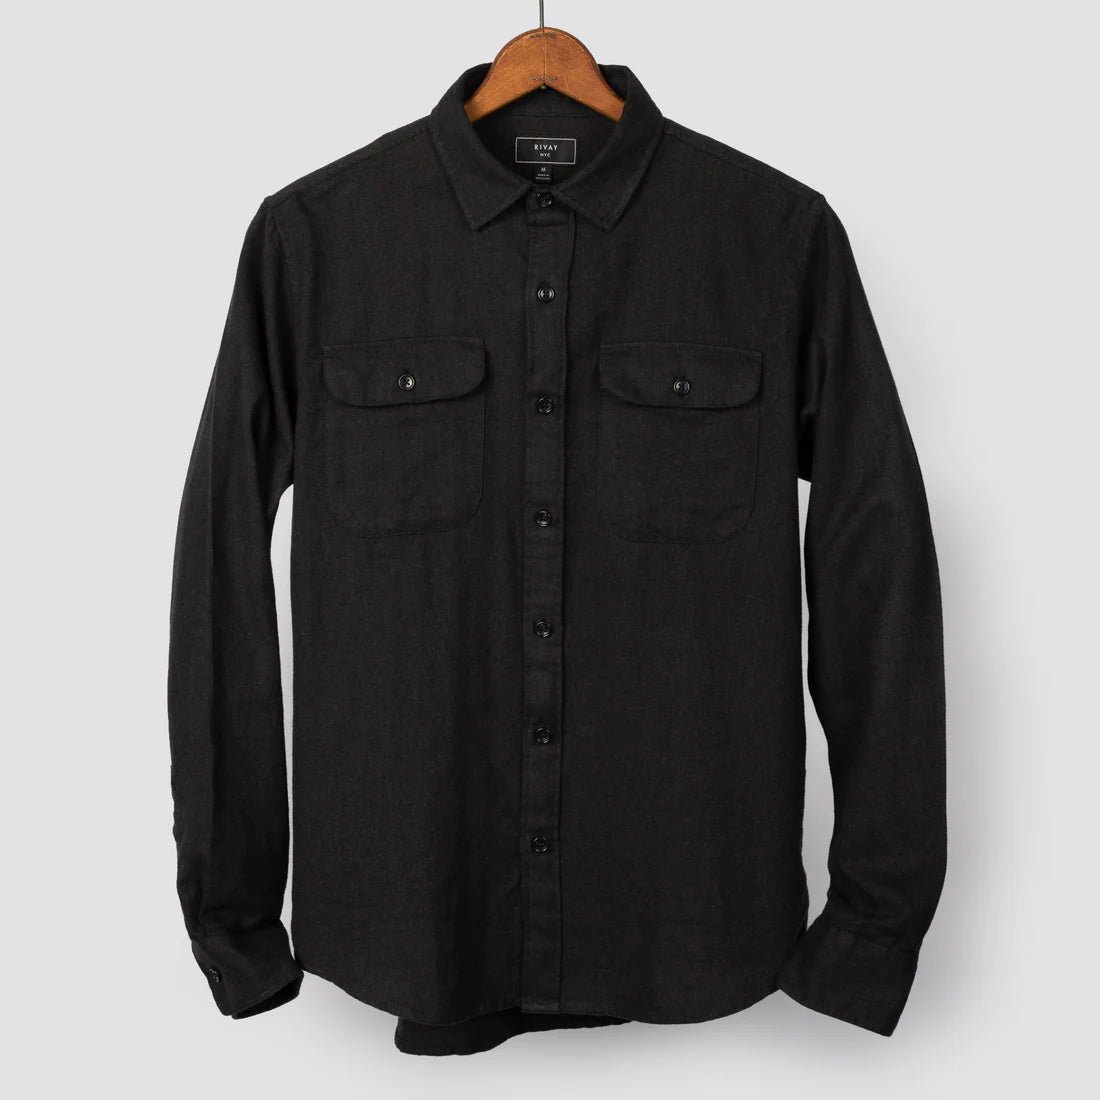 Miles Brushed Flannel Camp Shirt in Dark Olive Herringbone by RIVAY